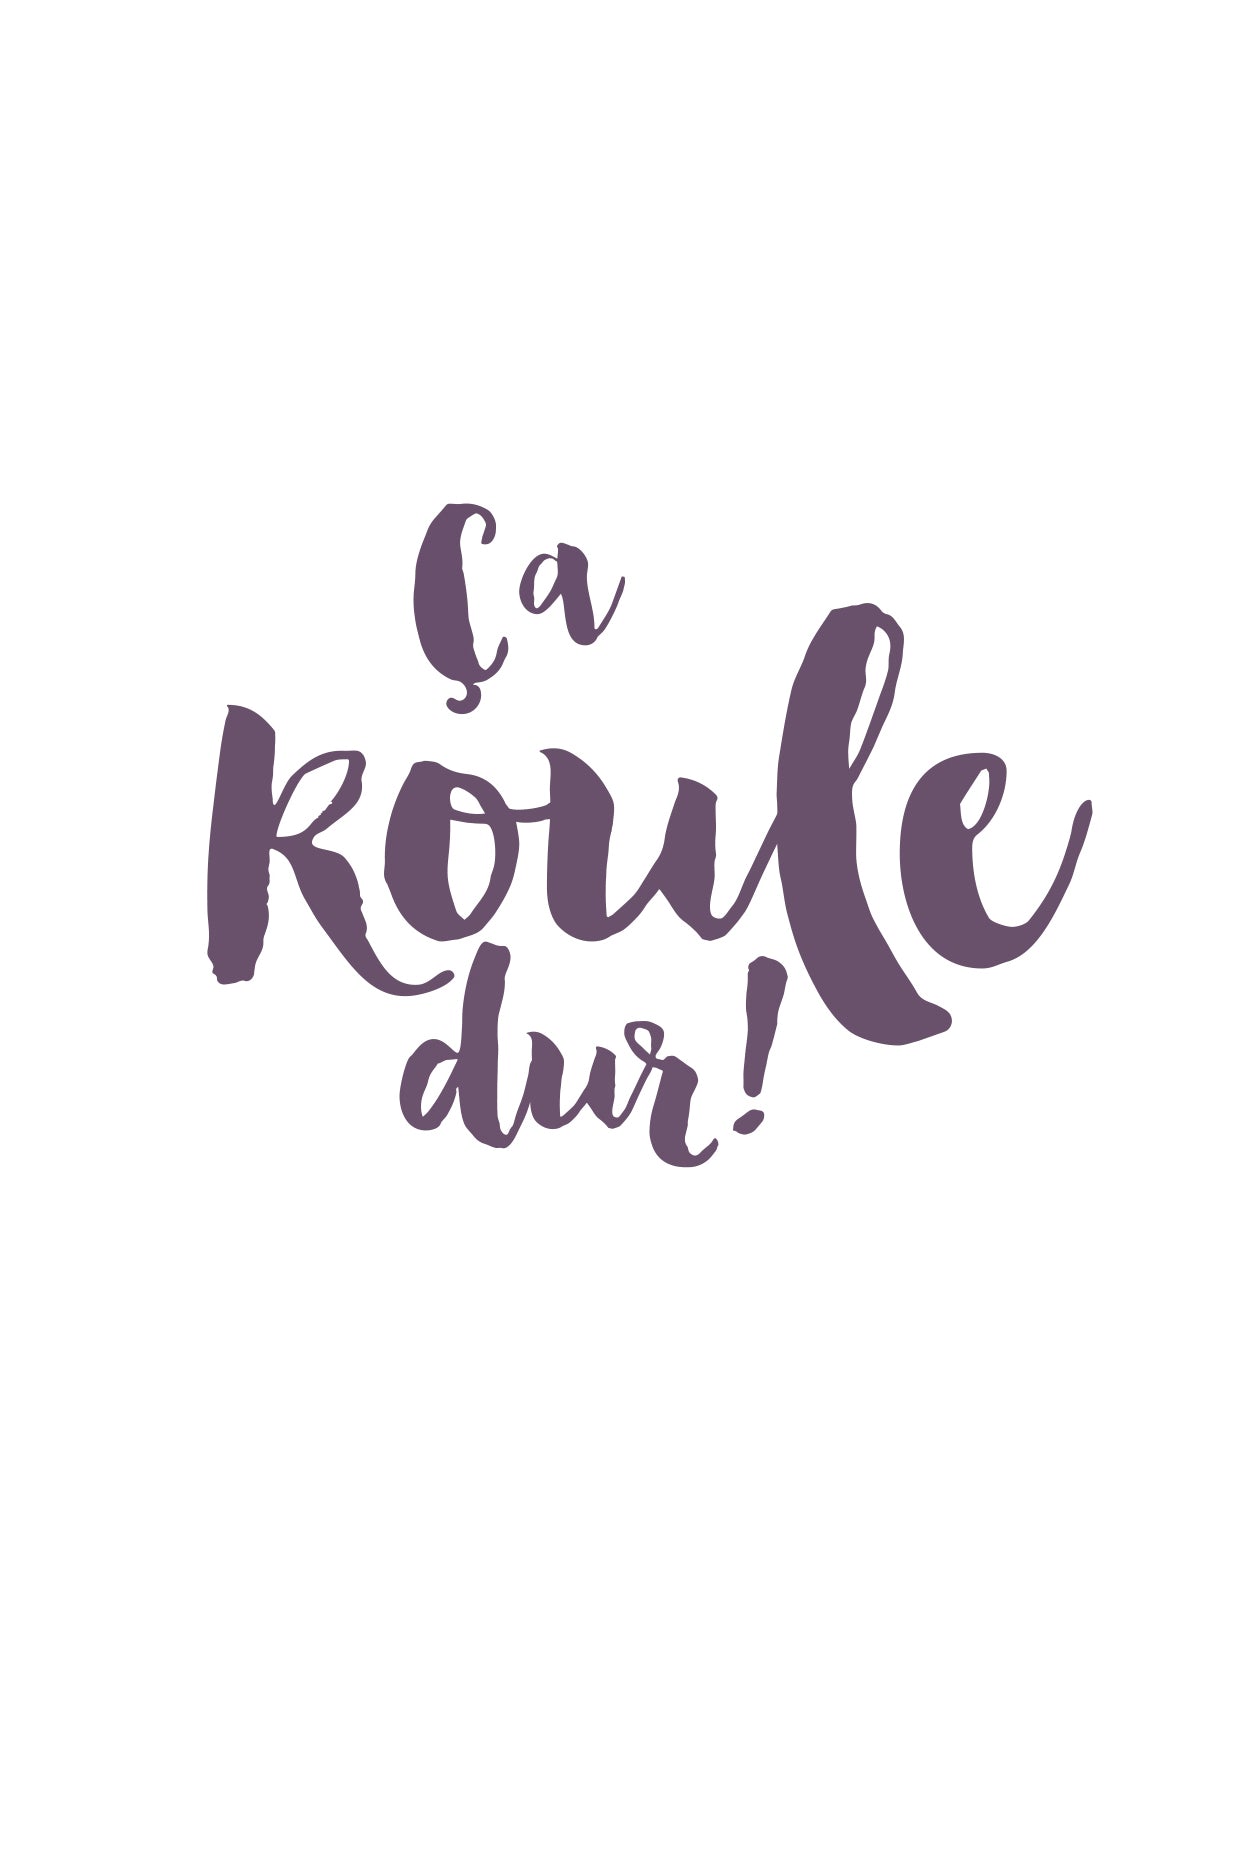 An Acadian saying in plum font on a white background.